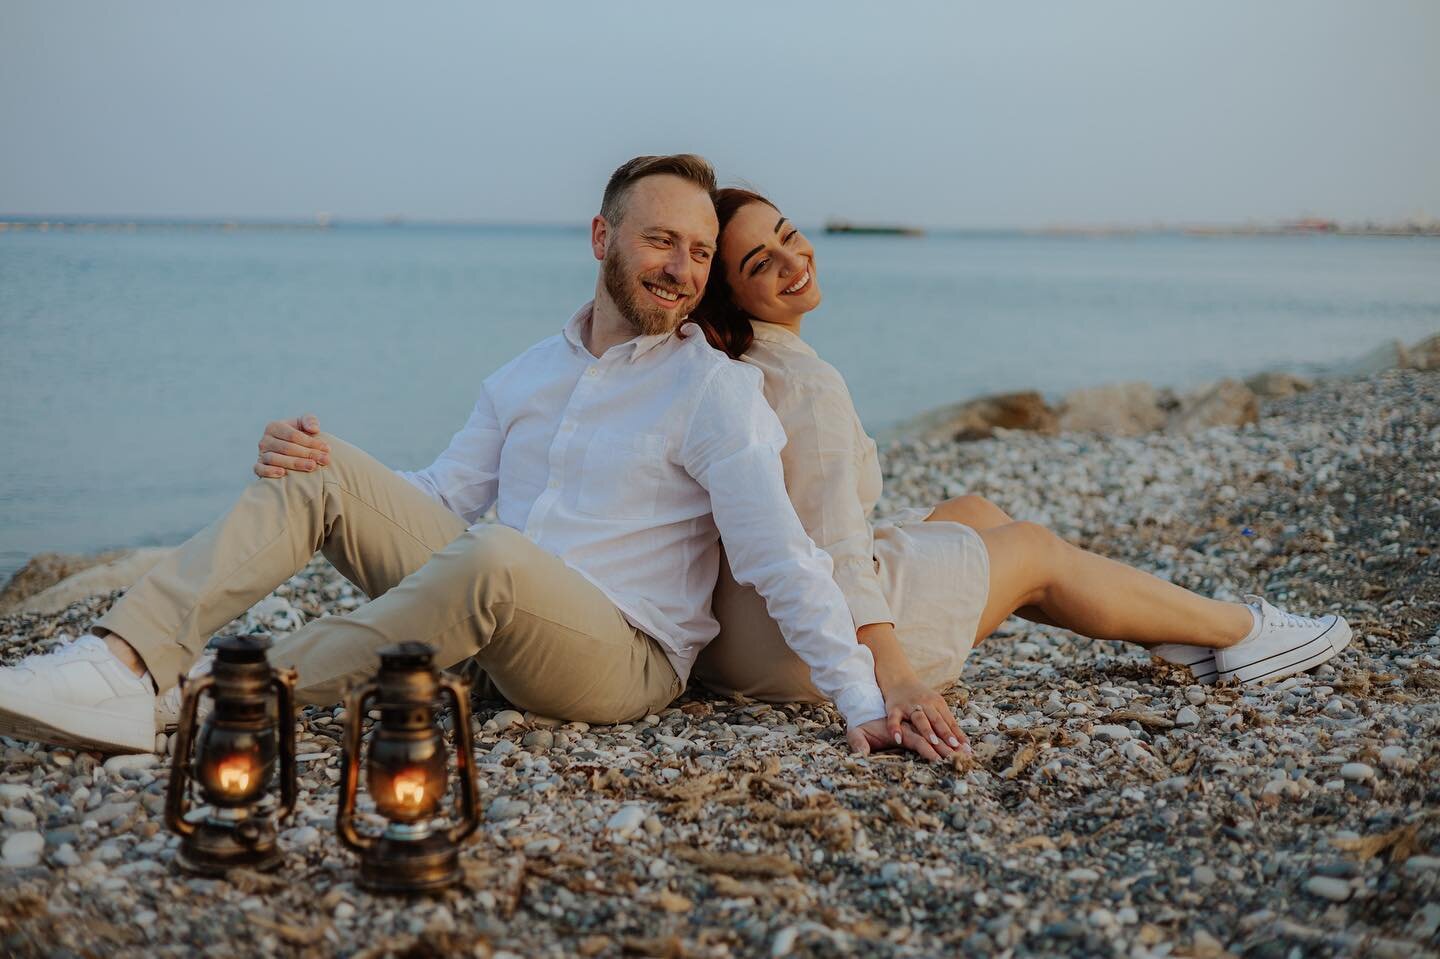 Getting ready for their upcoming wedding. But before that their prewedding photoshoot was a blast! Do you agree that vintage lanterns give a romantic feeling?

#evotionphotography #preweddingphotography #preweddingshoot #junebugwedding #junebugcommun